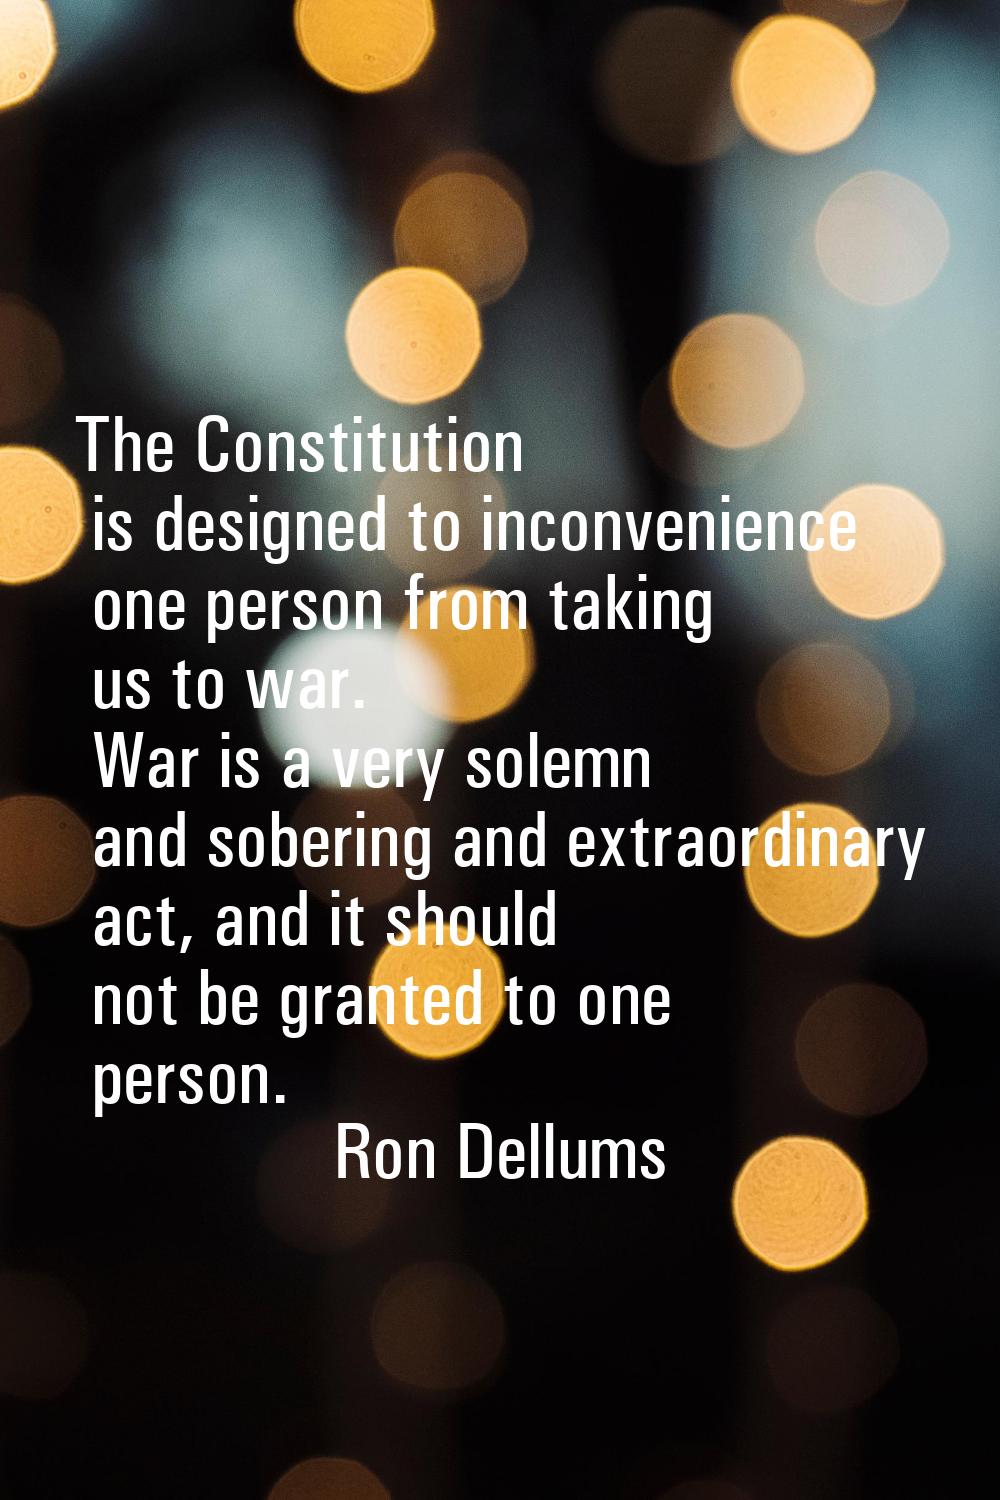 The Constitution is designed to inconvenience one person from taking us to war. War is a very solem